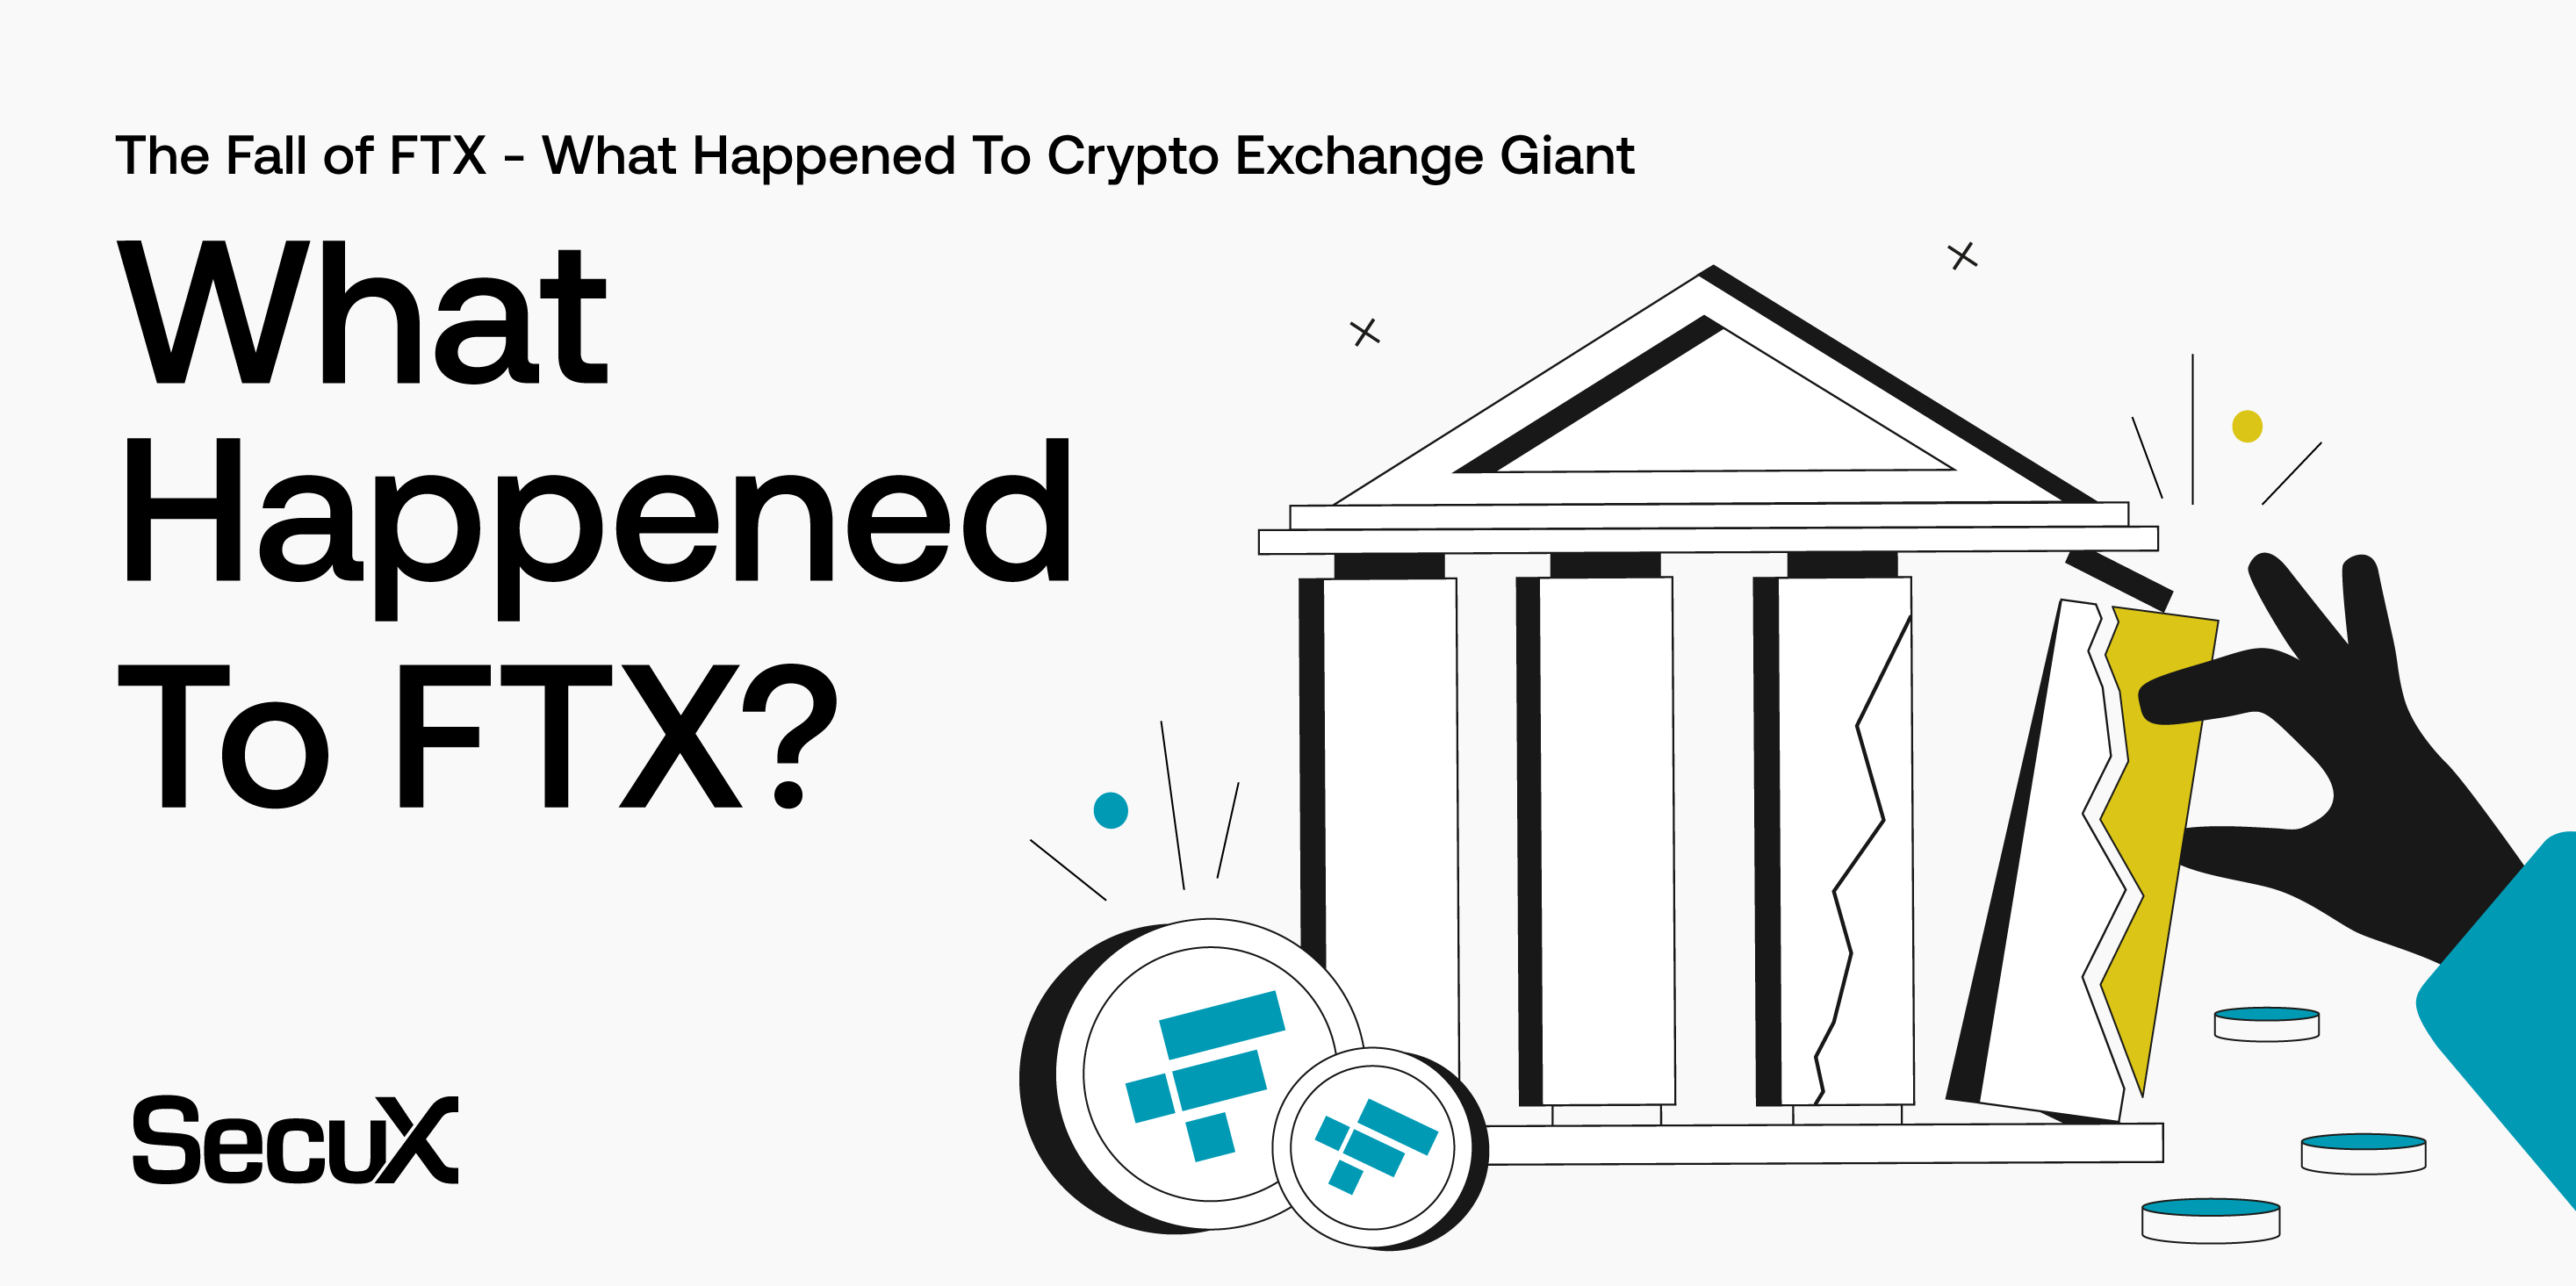 What Happened to Cryptocurrency Exchange FTX